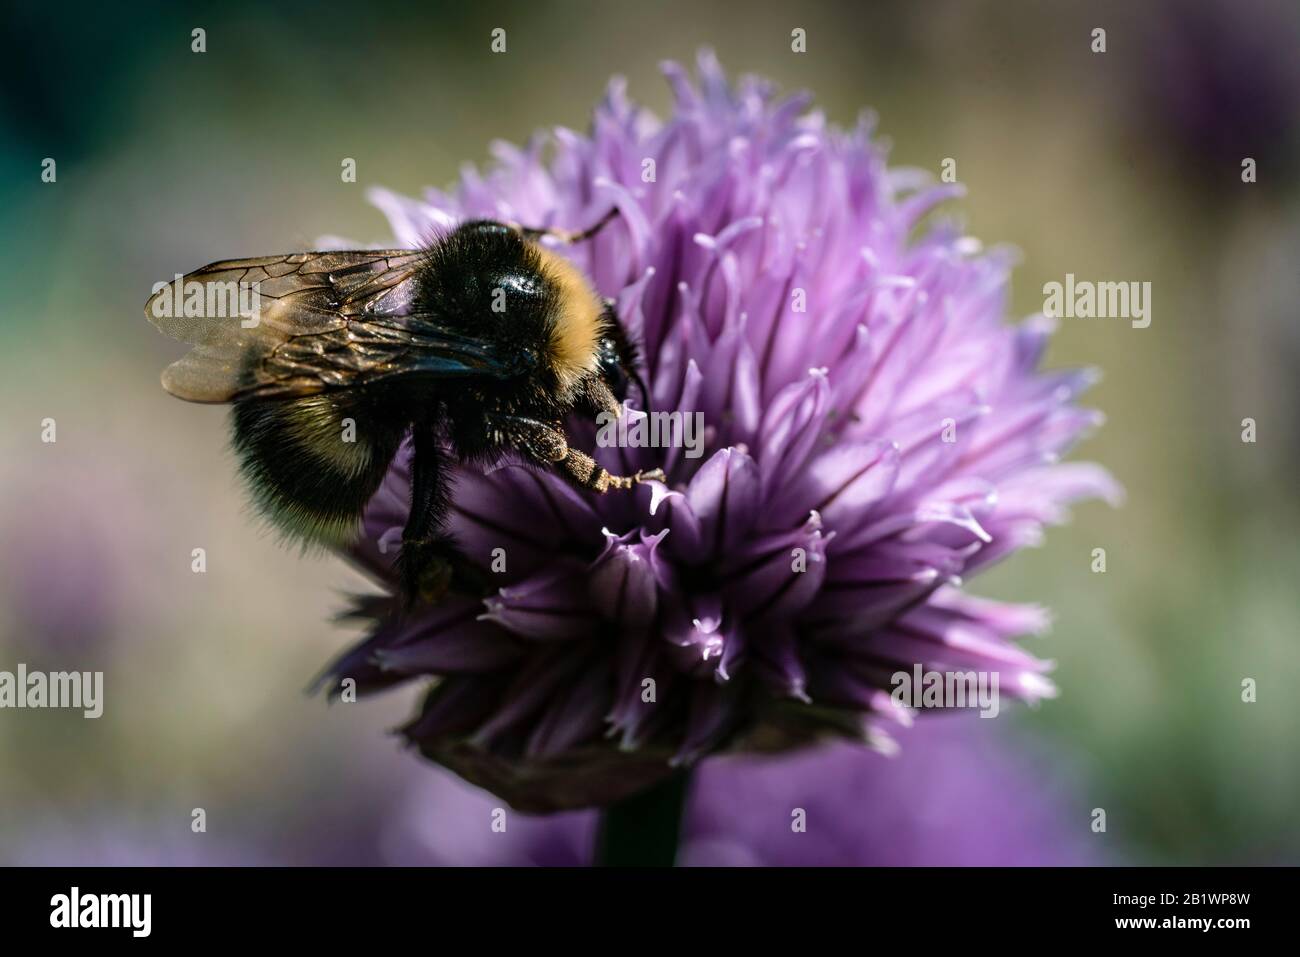 Bumblebee pollinating and looking for neсtar in blooming chive onion purple violet flower, sunny day, close up photo, bokeh Stock Photo